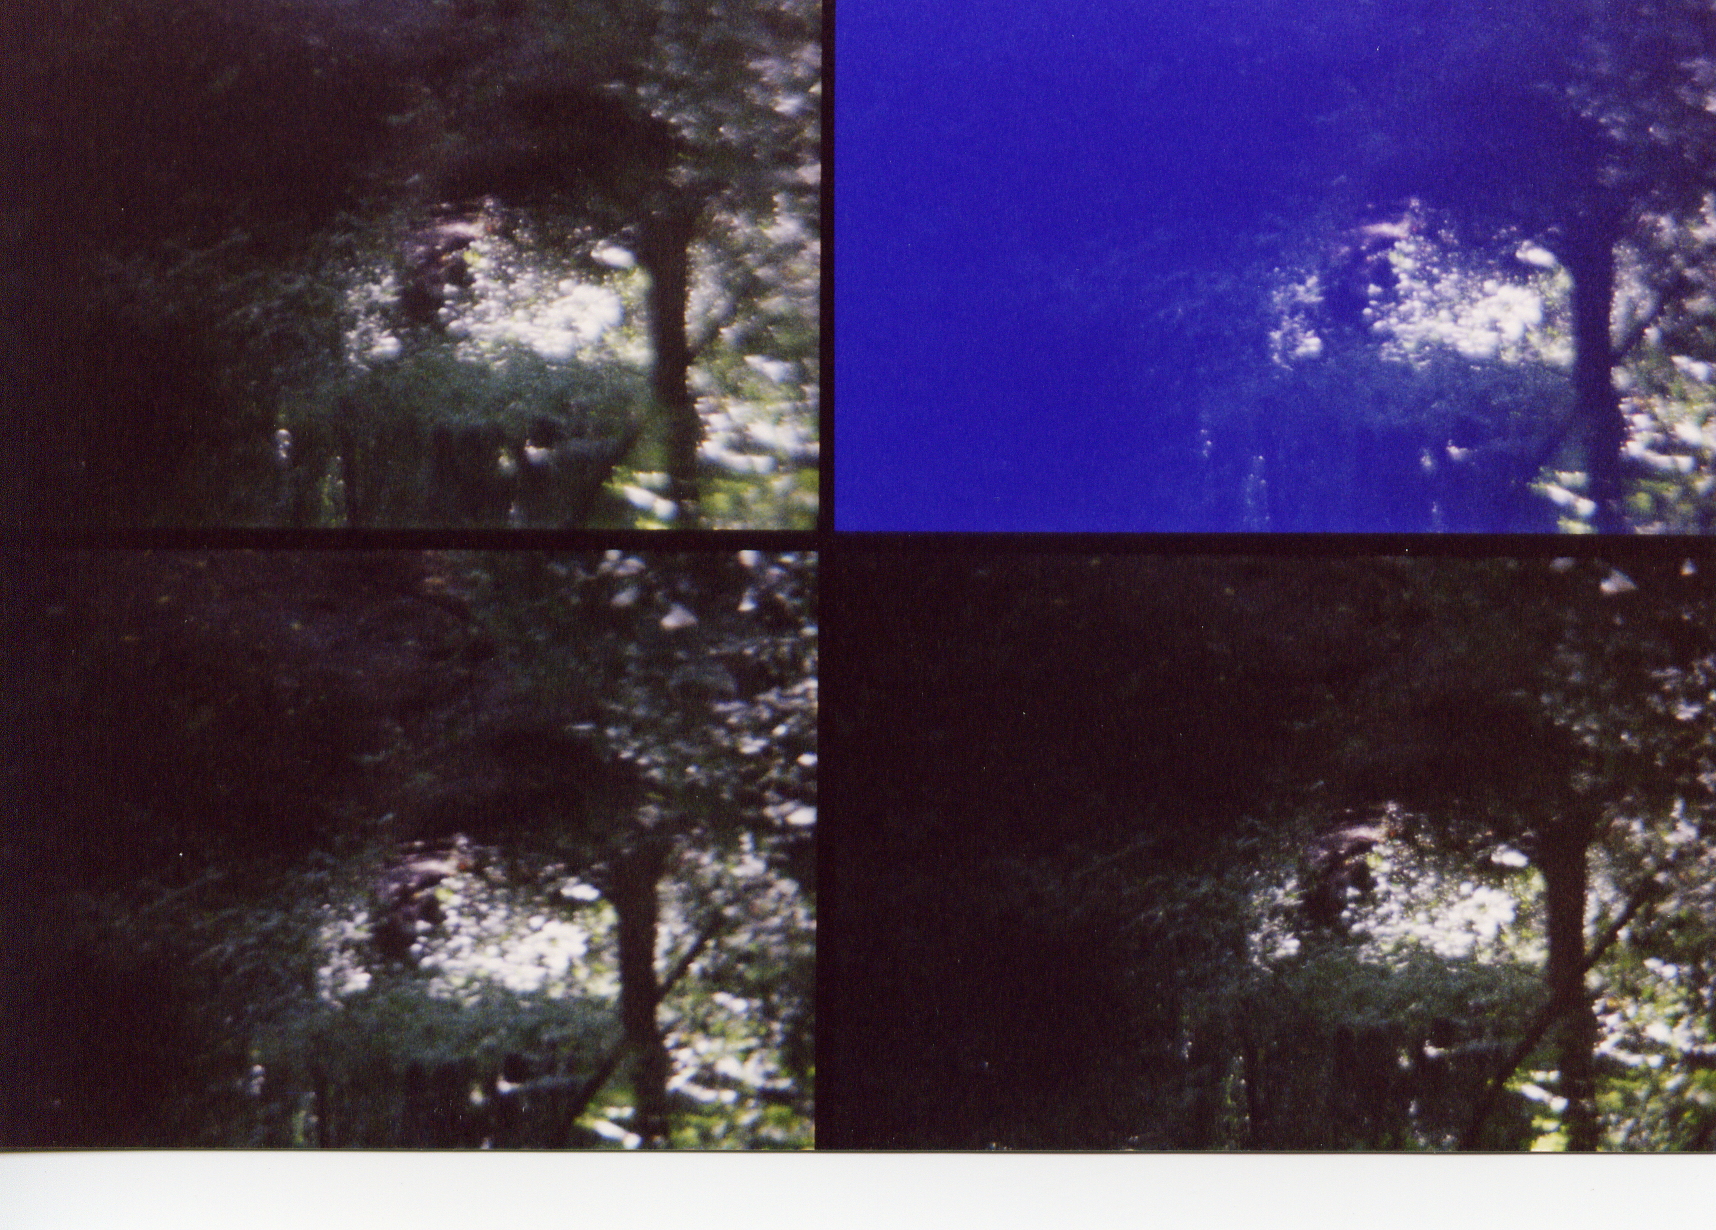 Four lens camera photograph with unexplained anomaly